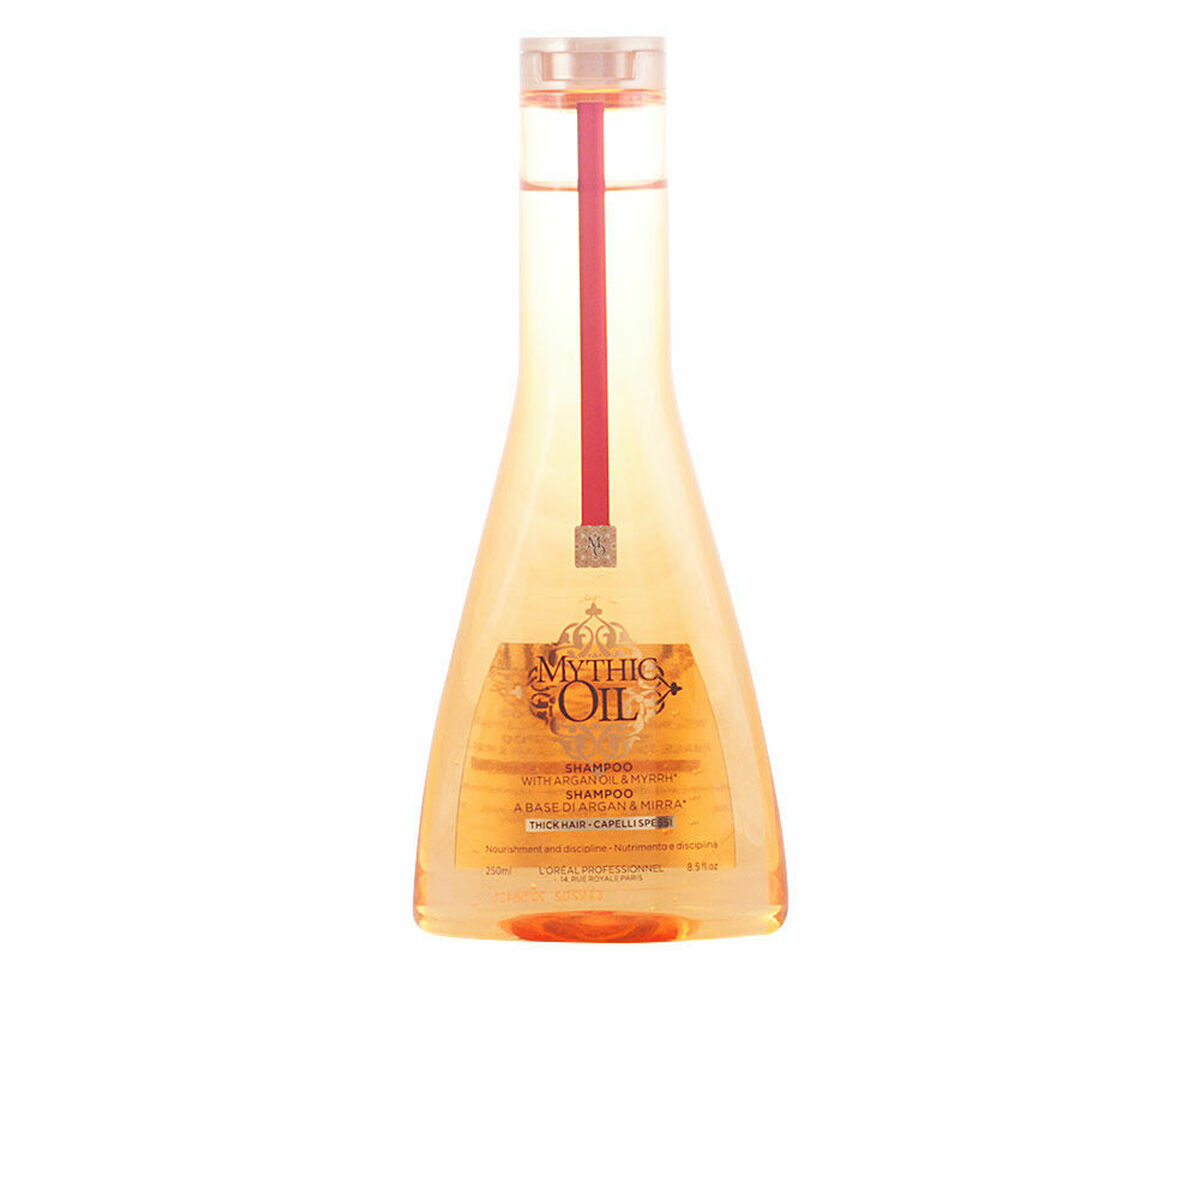 loreal mythic oil thick szampon